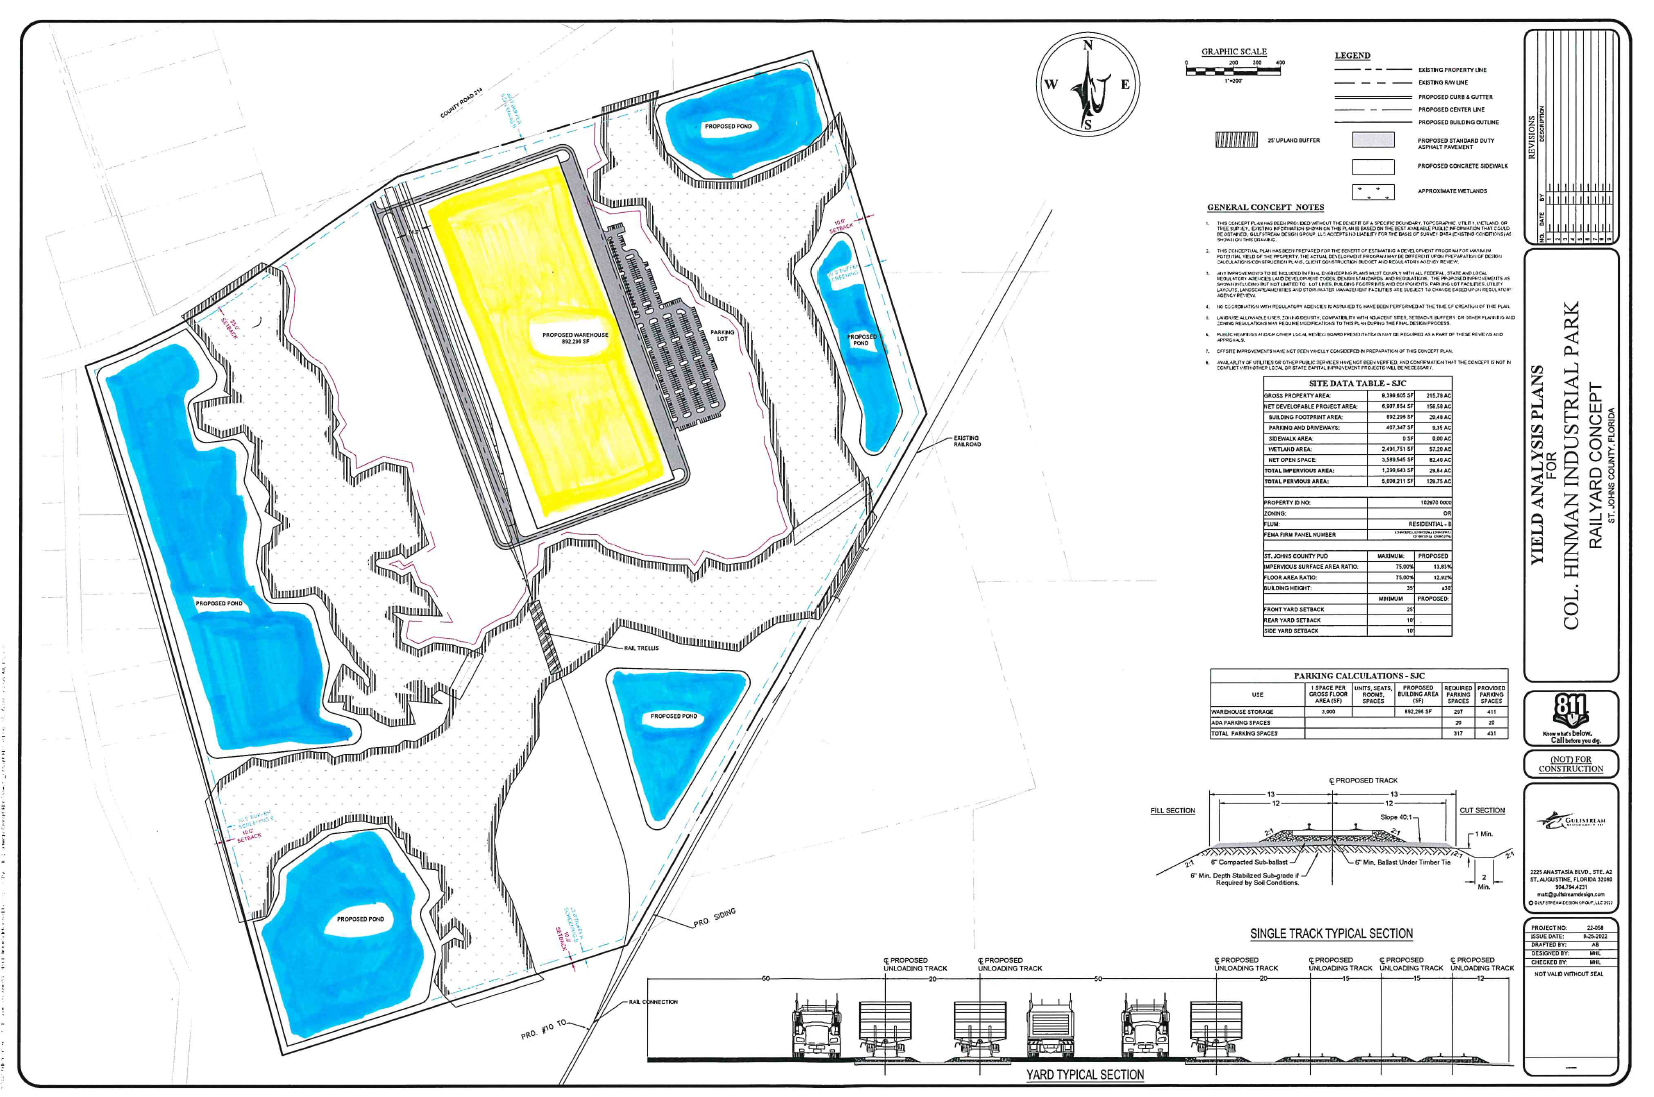 The site plan for the Colonial Hinman Intermodal Exchange Facility.